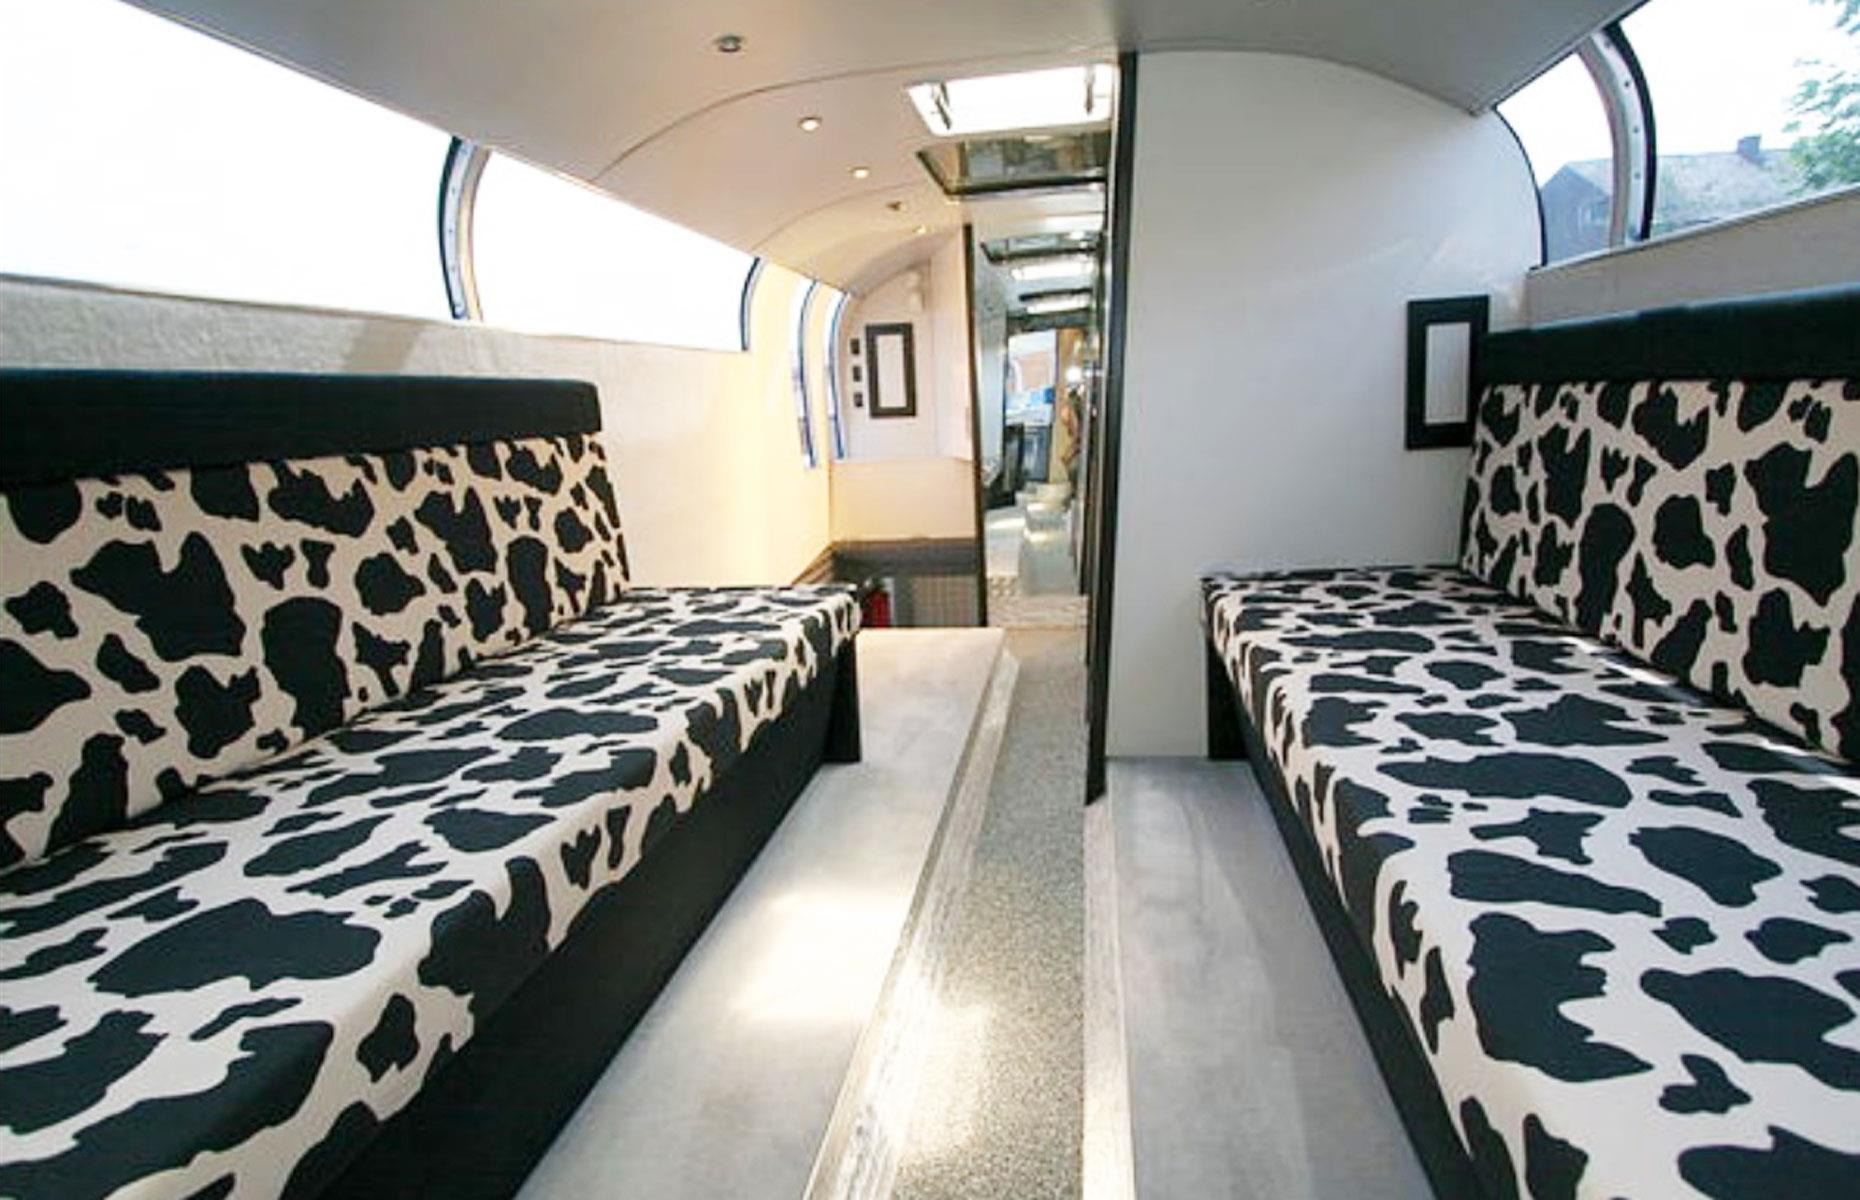 <p>The upper deck contains a capacious living area, a full kitchen, a master bedroom, guest bedrooms and a large bathroom with a shower. There's also a secondary bedroom at the opposite end of the level, fitted out with bunks that can sleep up to four people. </p>  <p>The bus was bought in 2004 by a company called Omnibushandel Mario Roettgen (OMR), and despite attempting to sell it on at least one occasion, they still own the vehicle.</p>